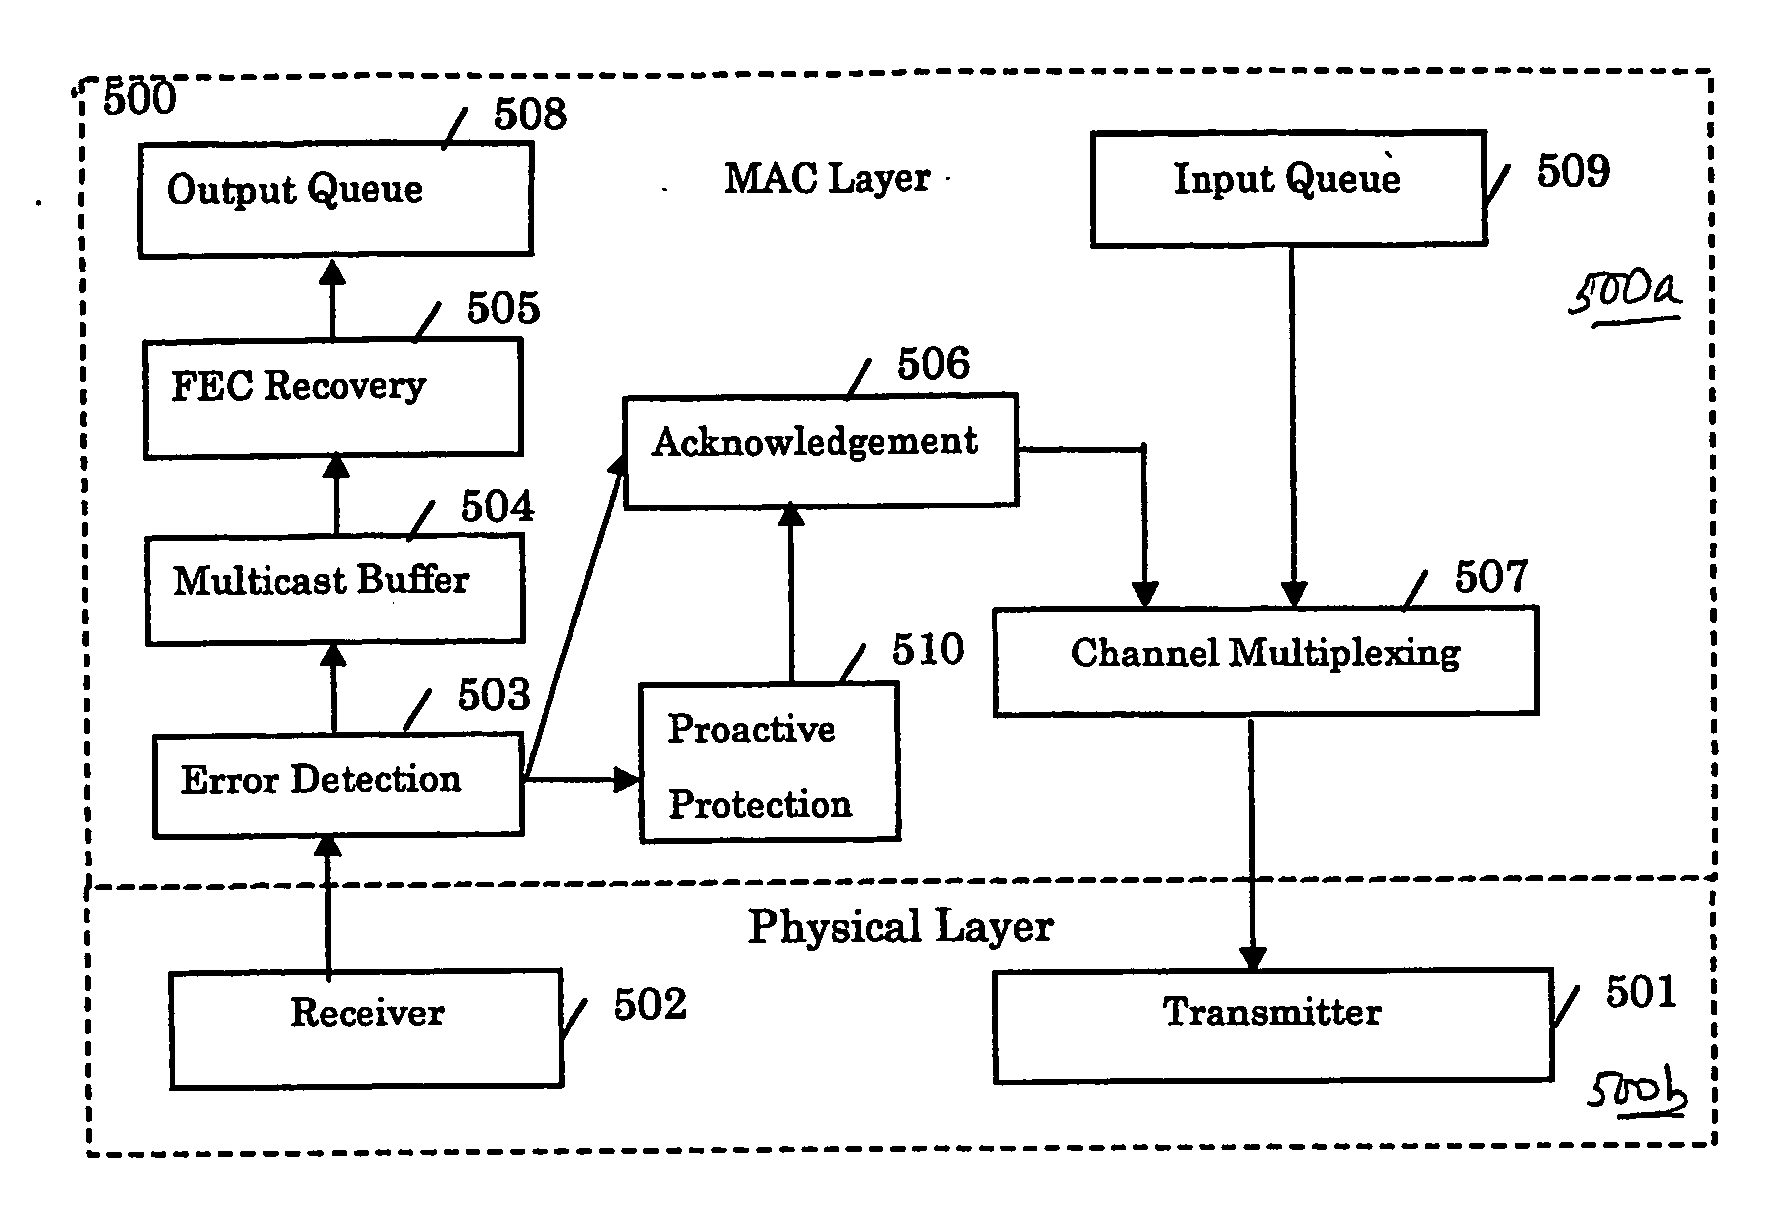 Method for supporting scalable and reliable multicast in tdma/tdd systems using feedback suppression techniques